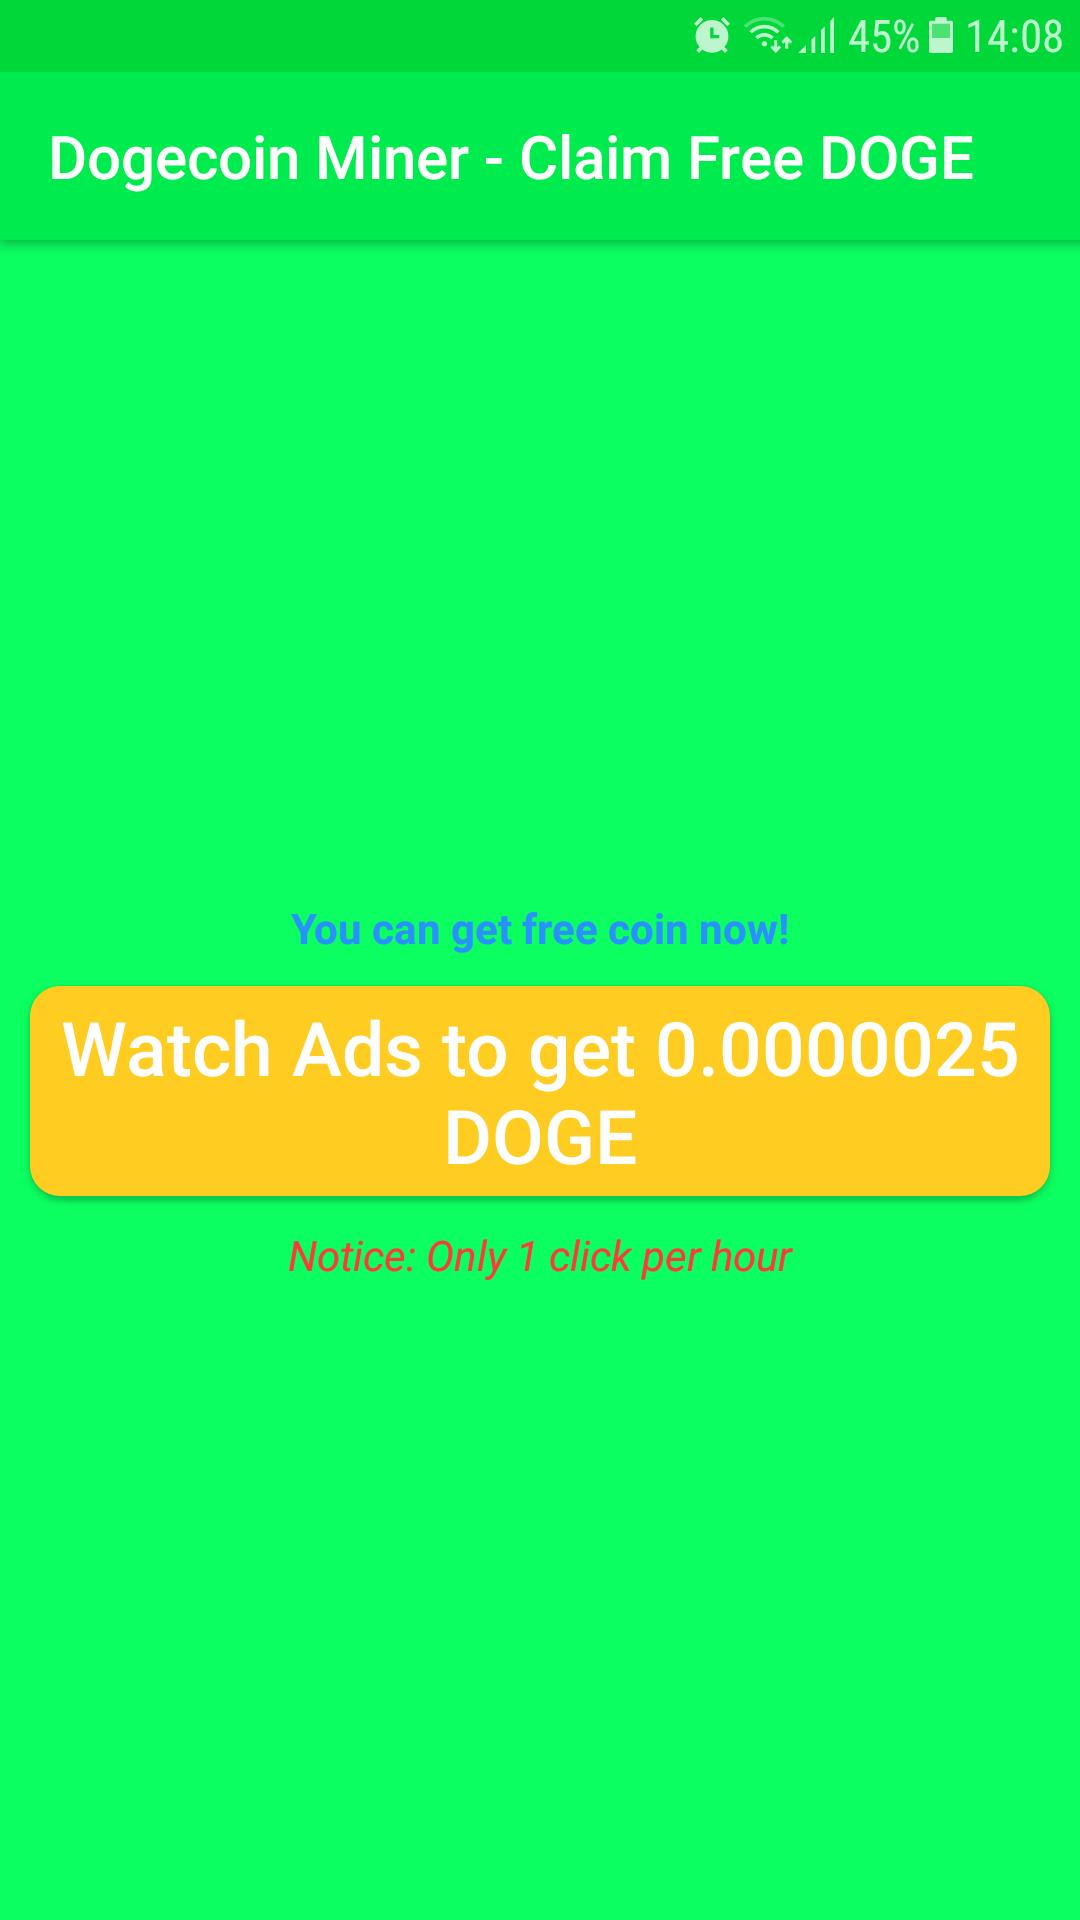 Dogecoin Miner - Claim Free DOGE for Android - APK Download